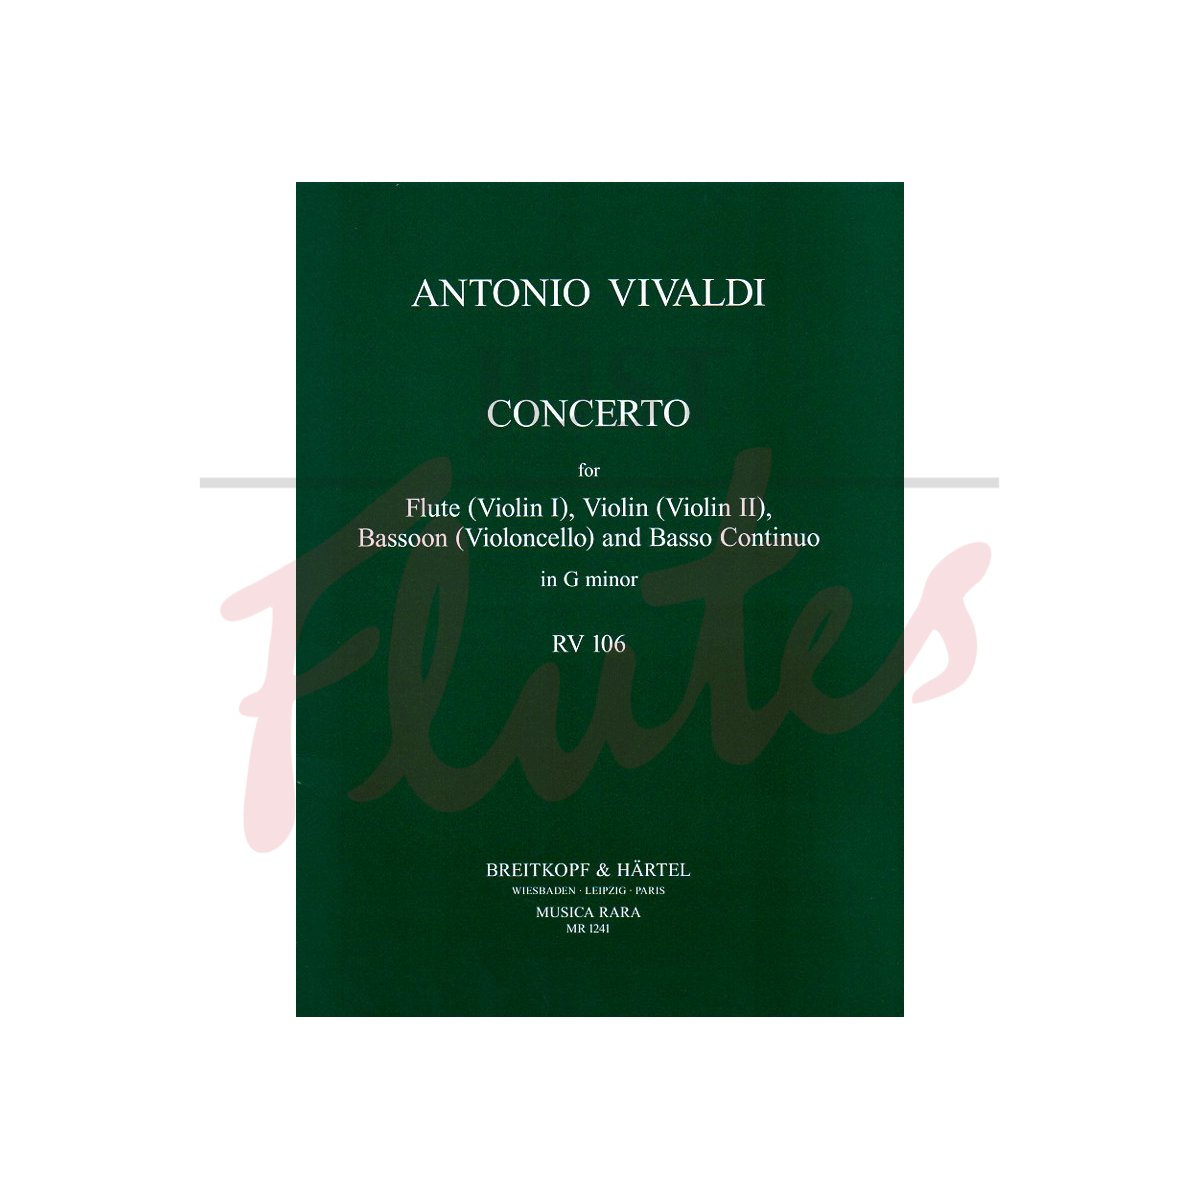 Concerto in G minor for Flute, Violin, Bassoon and Basso Continuo